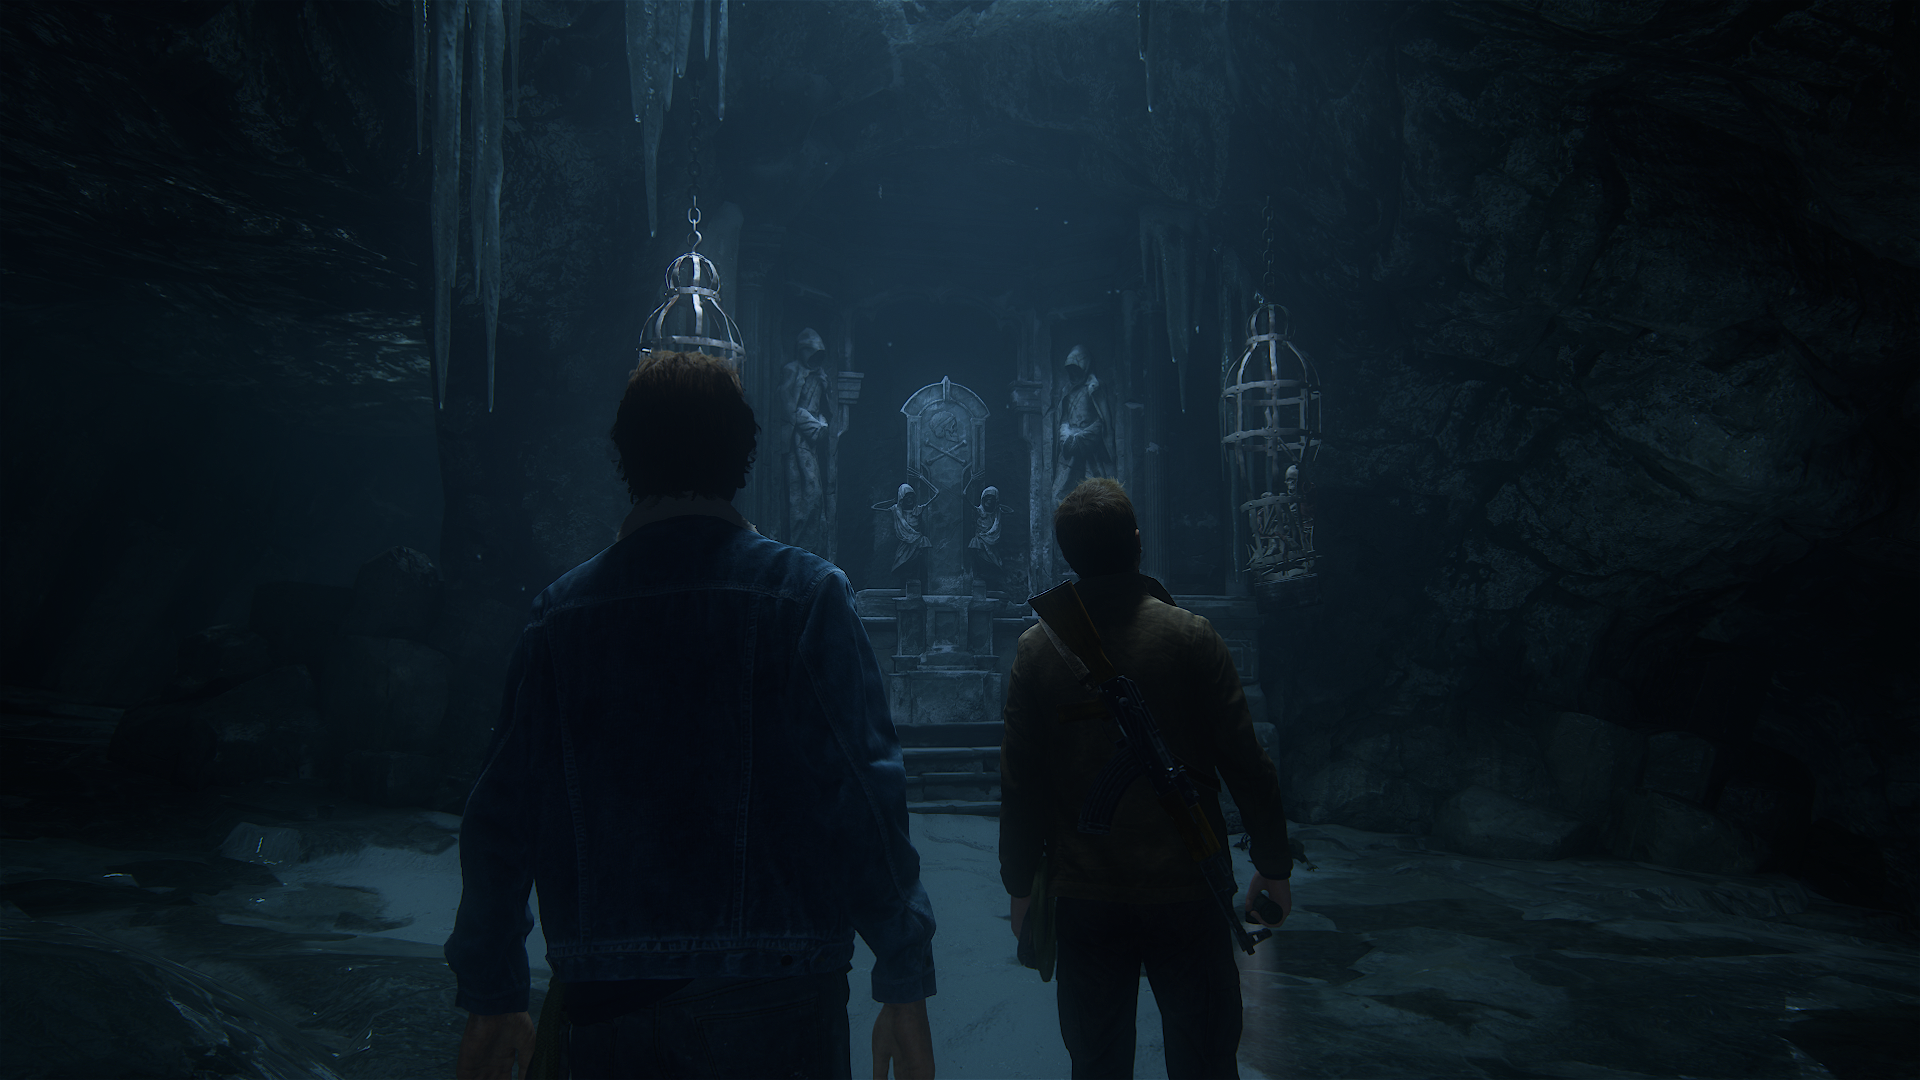 Uncharted 4 A Thief's End screenshots